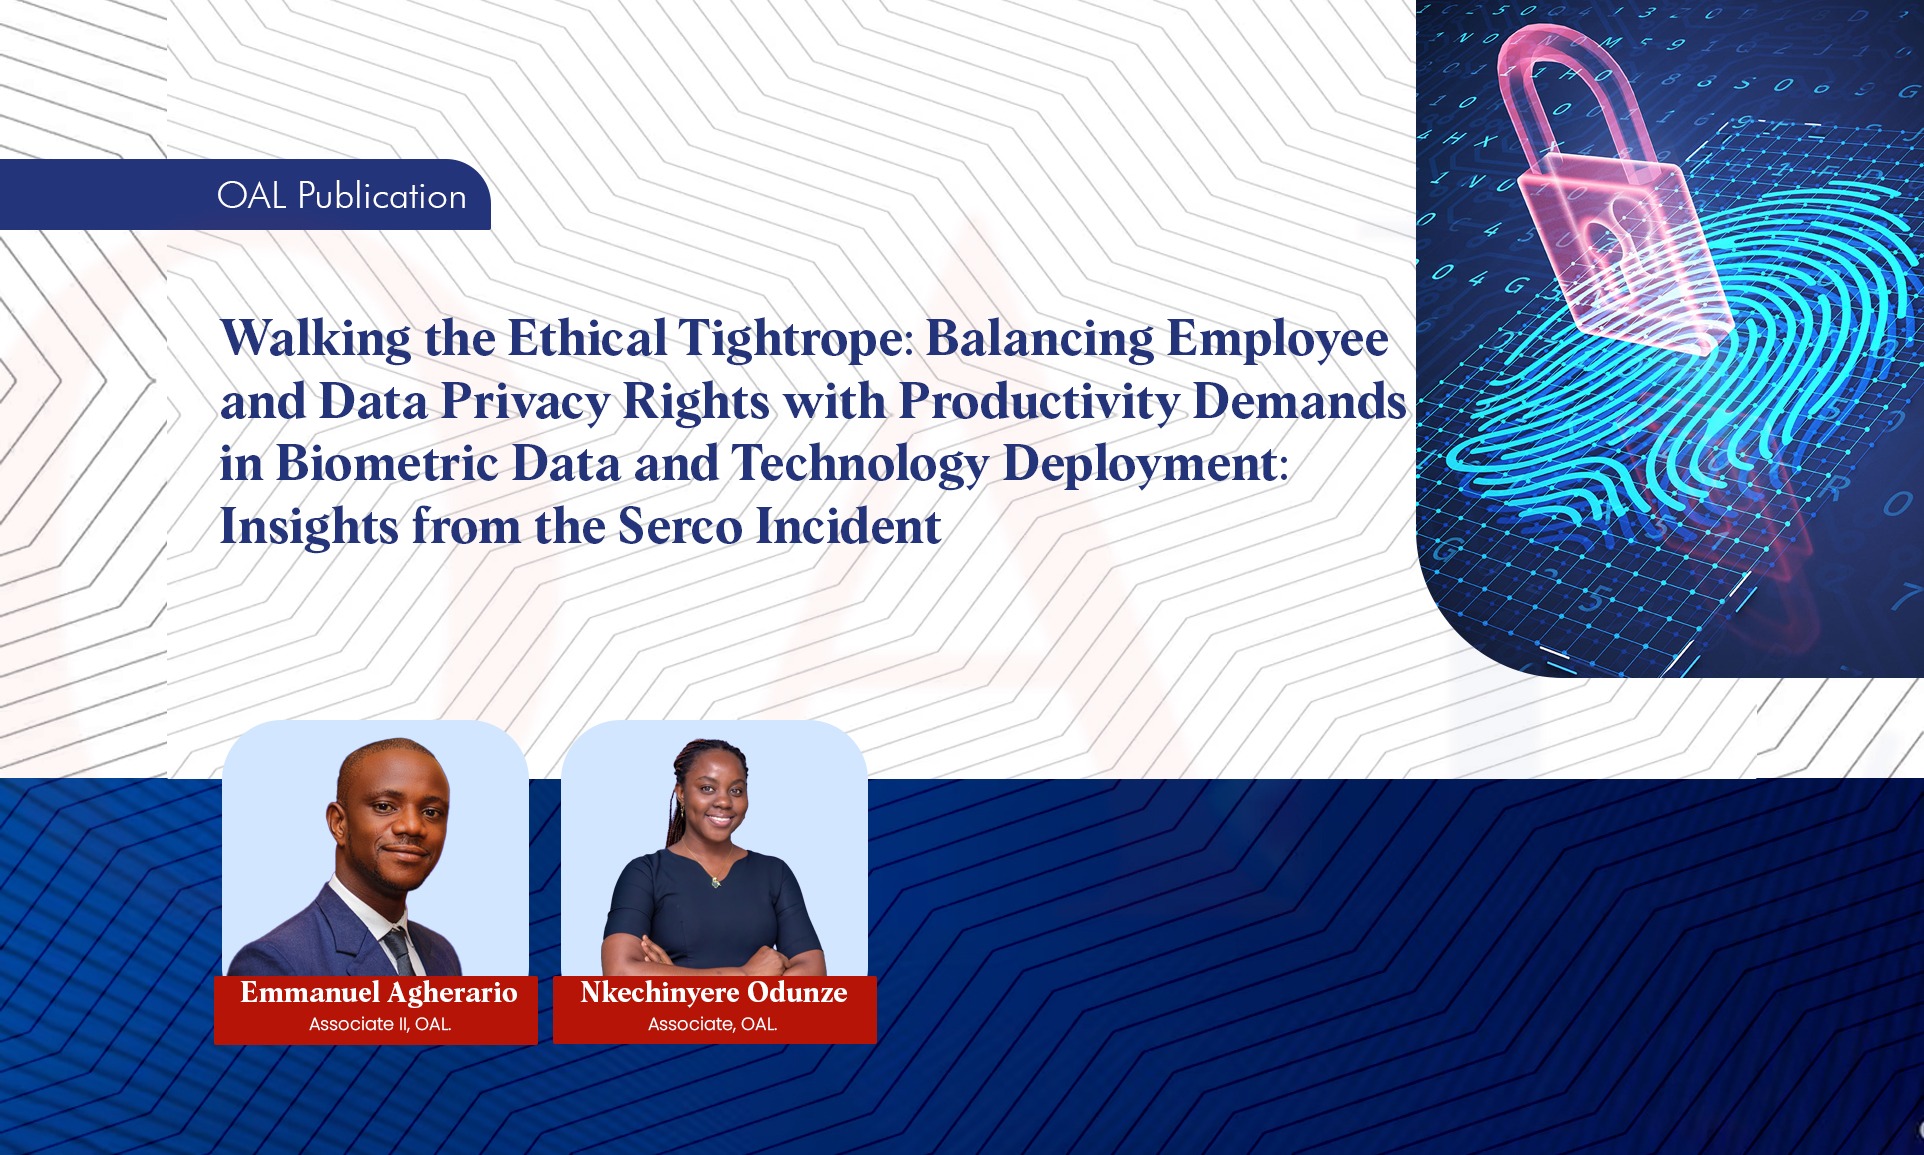 Walking the Ethical Tightrope: Balancing Employee and Data Privacy Rights with Productivity Demands in Biometric Data and Technology Deployment: Insights from the Serco Incident